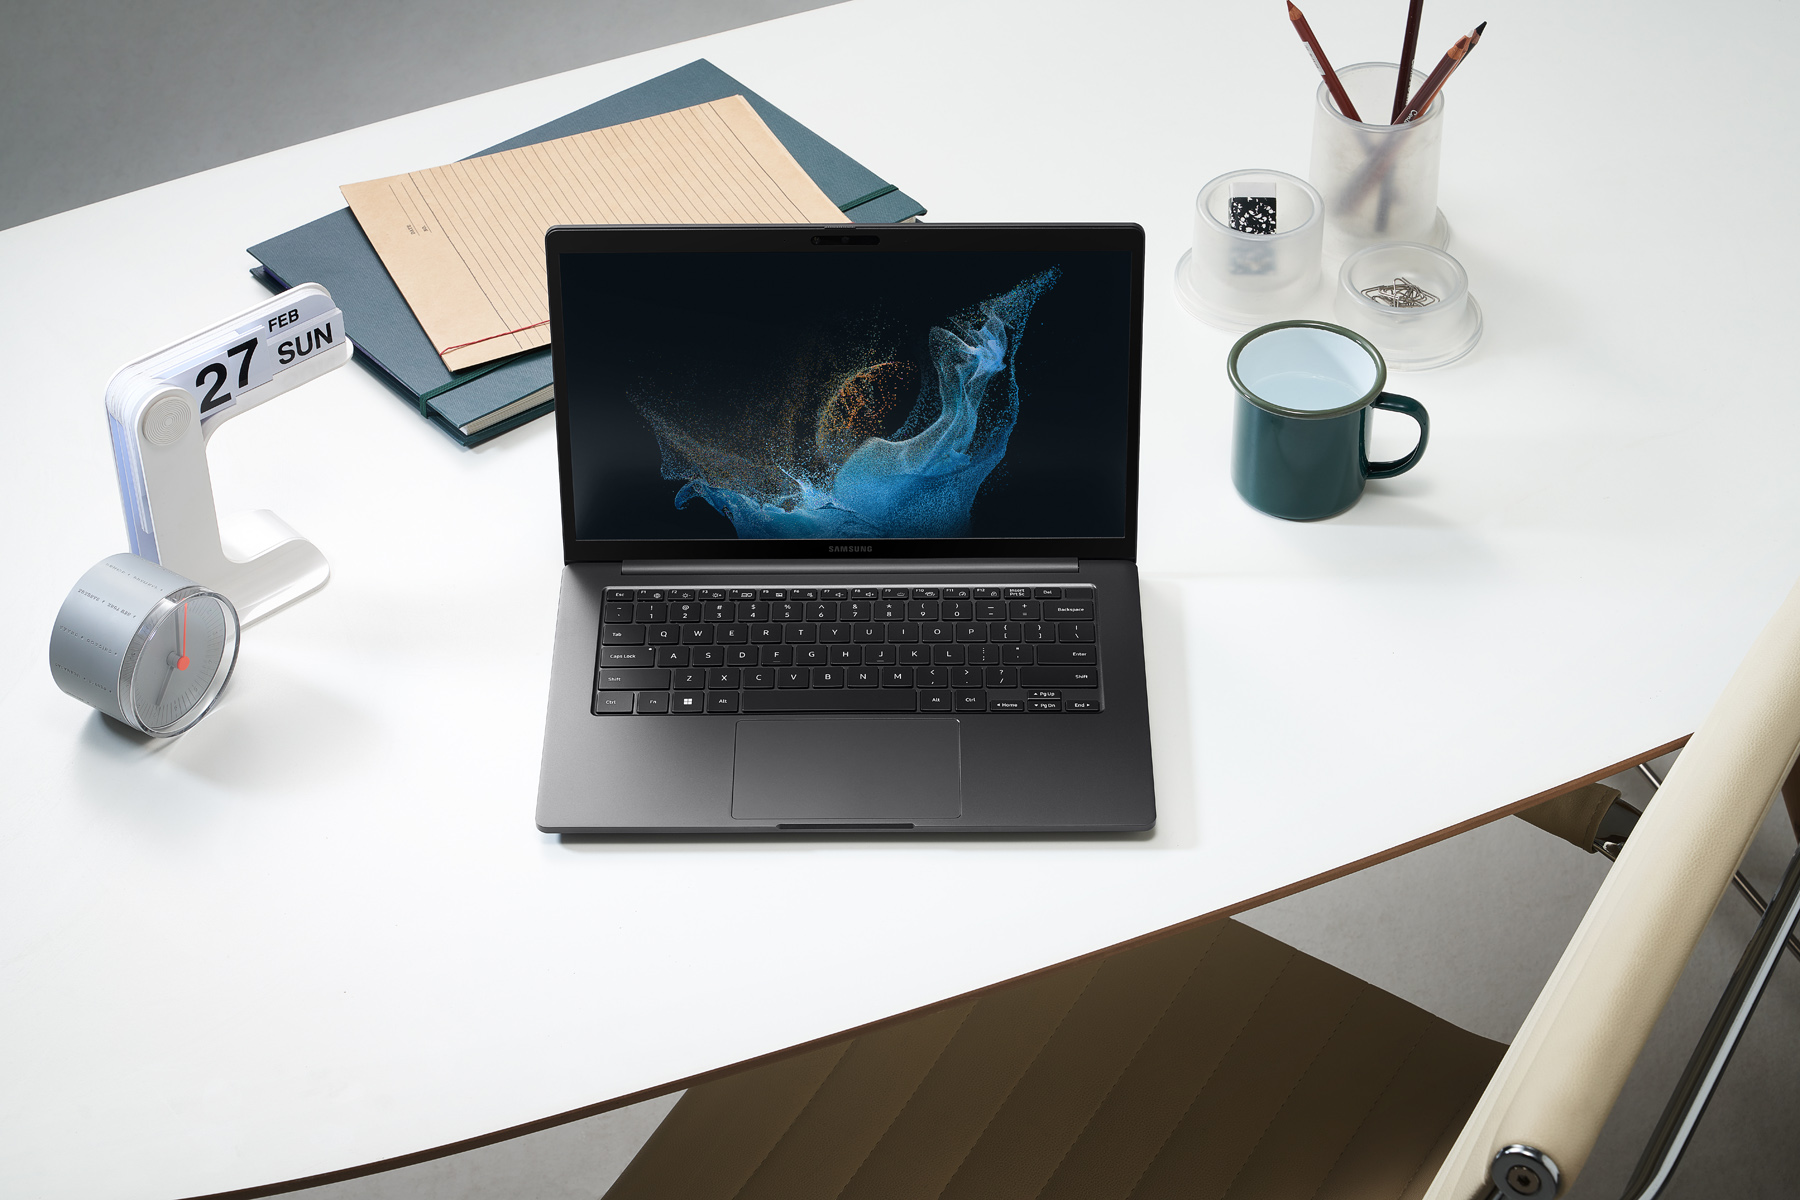 001 galaxy book2 business lifestyle